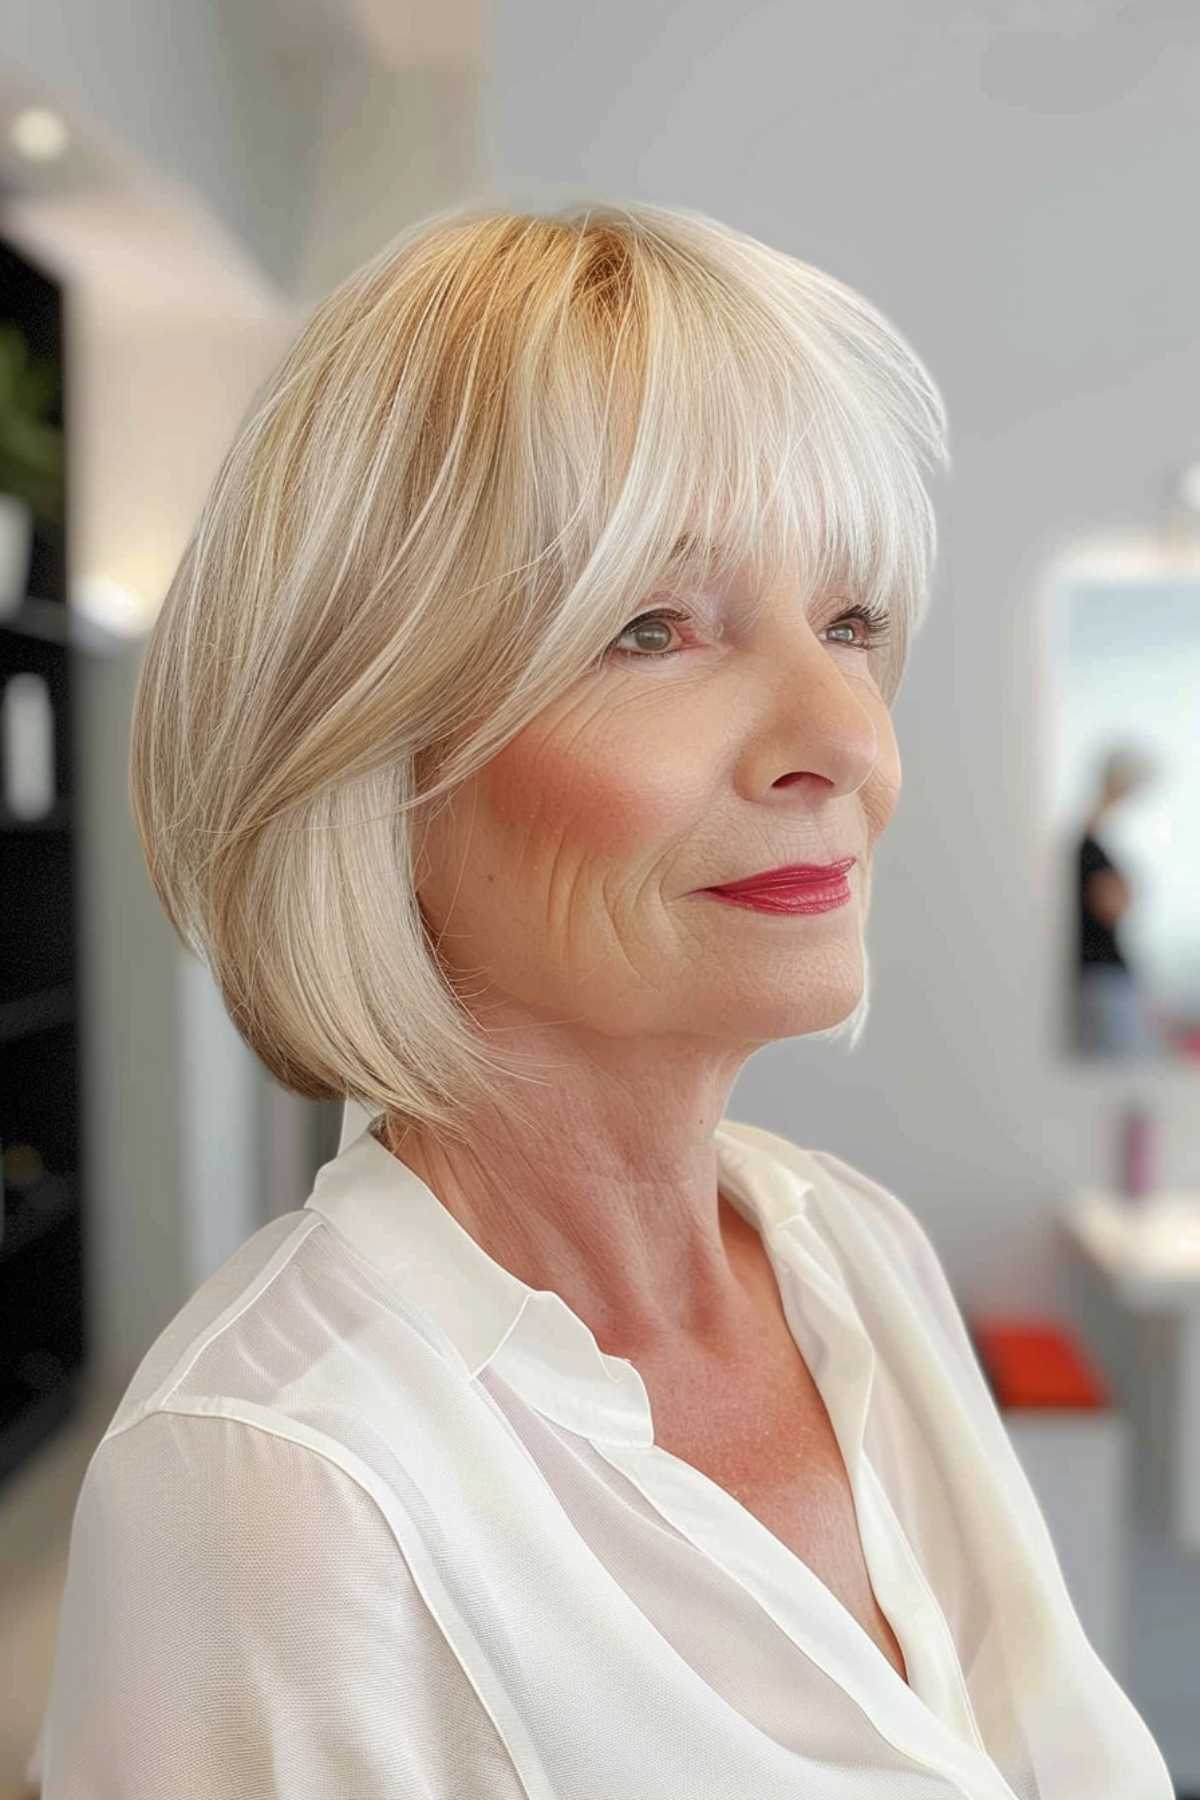 Mature woman with a layered hairstyle for fine straight hair and seamlessly blended bangs, wearing a white blouse.